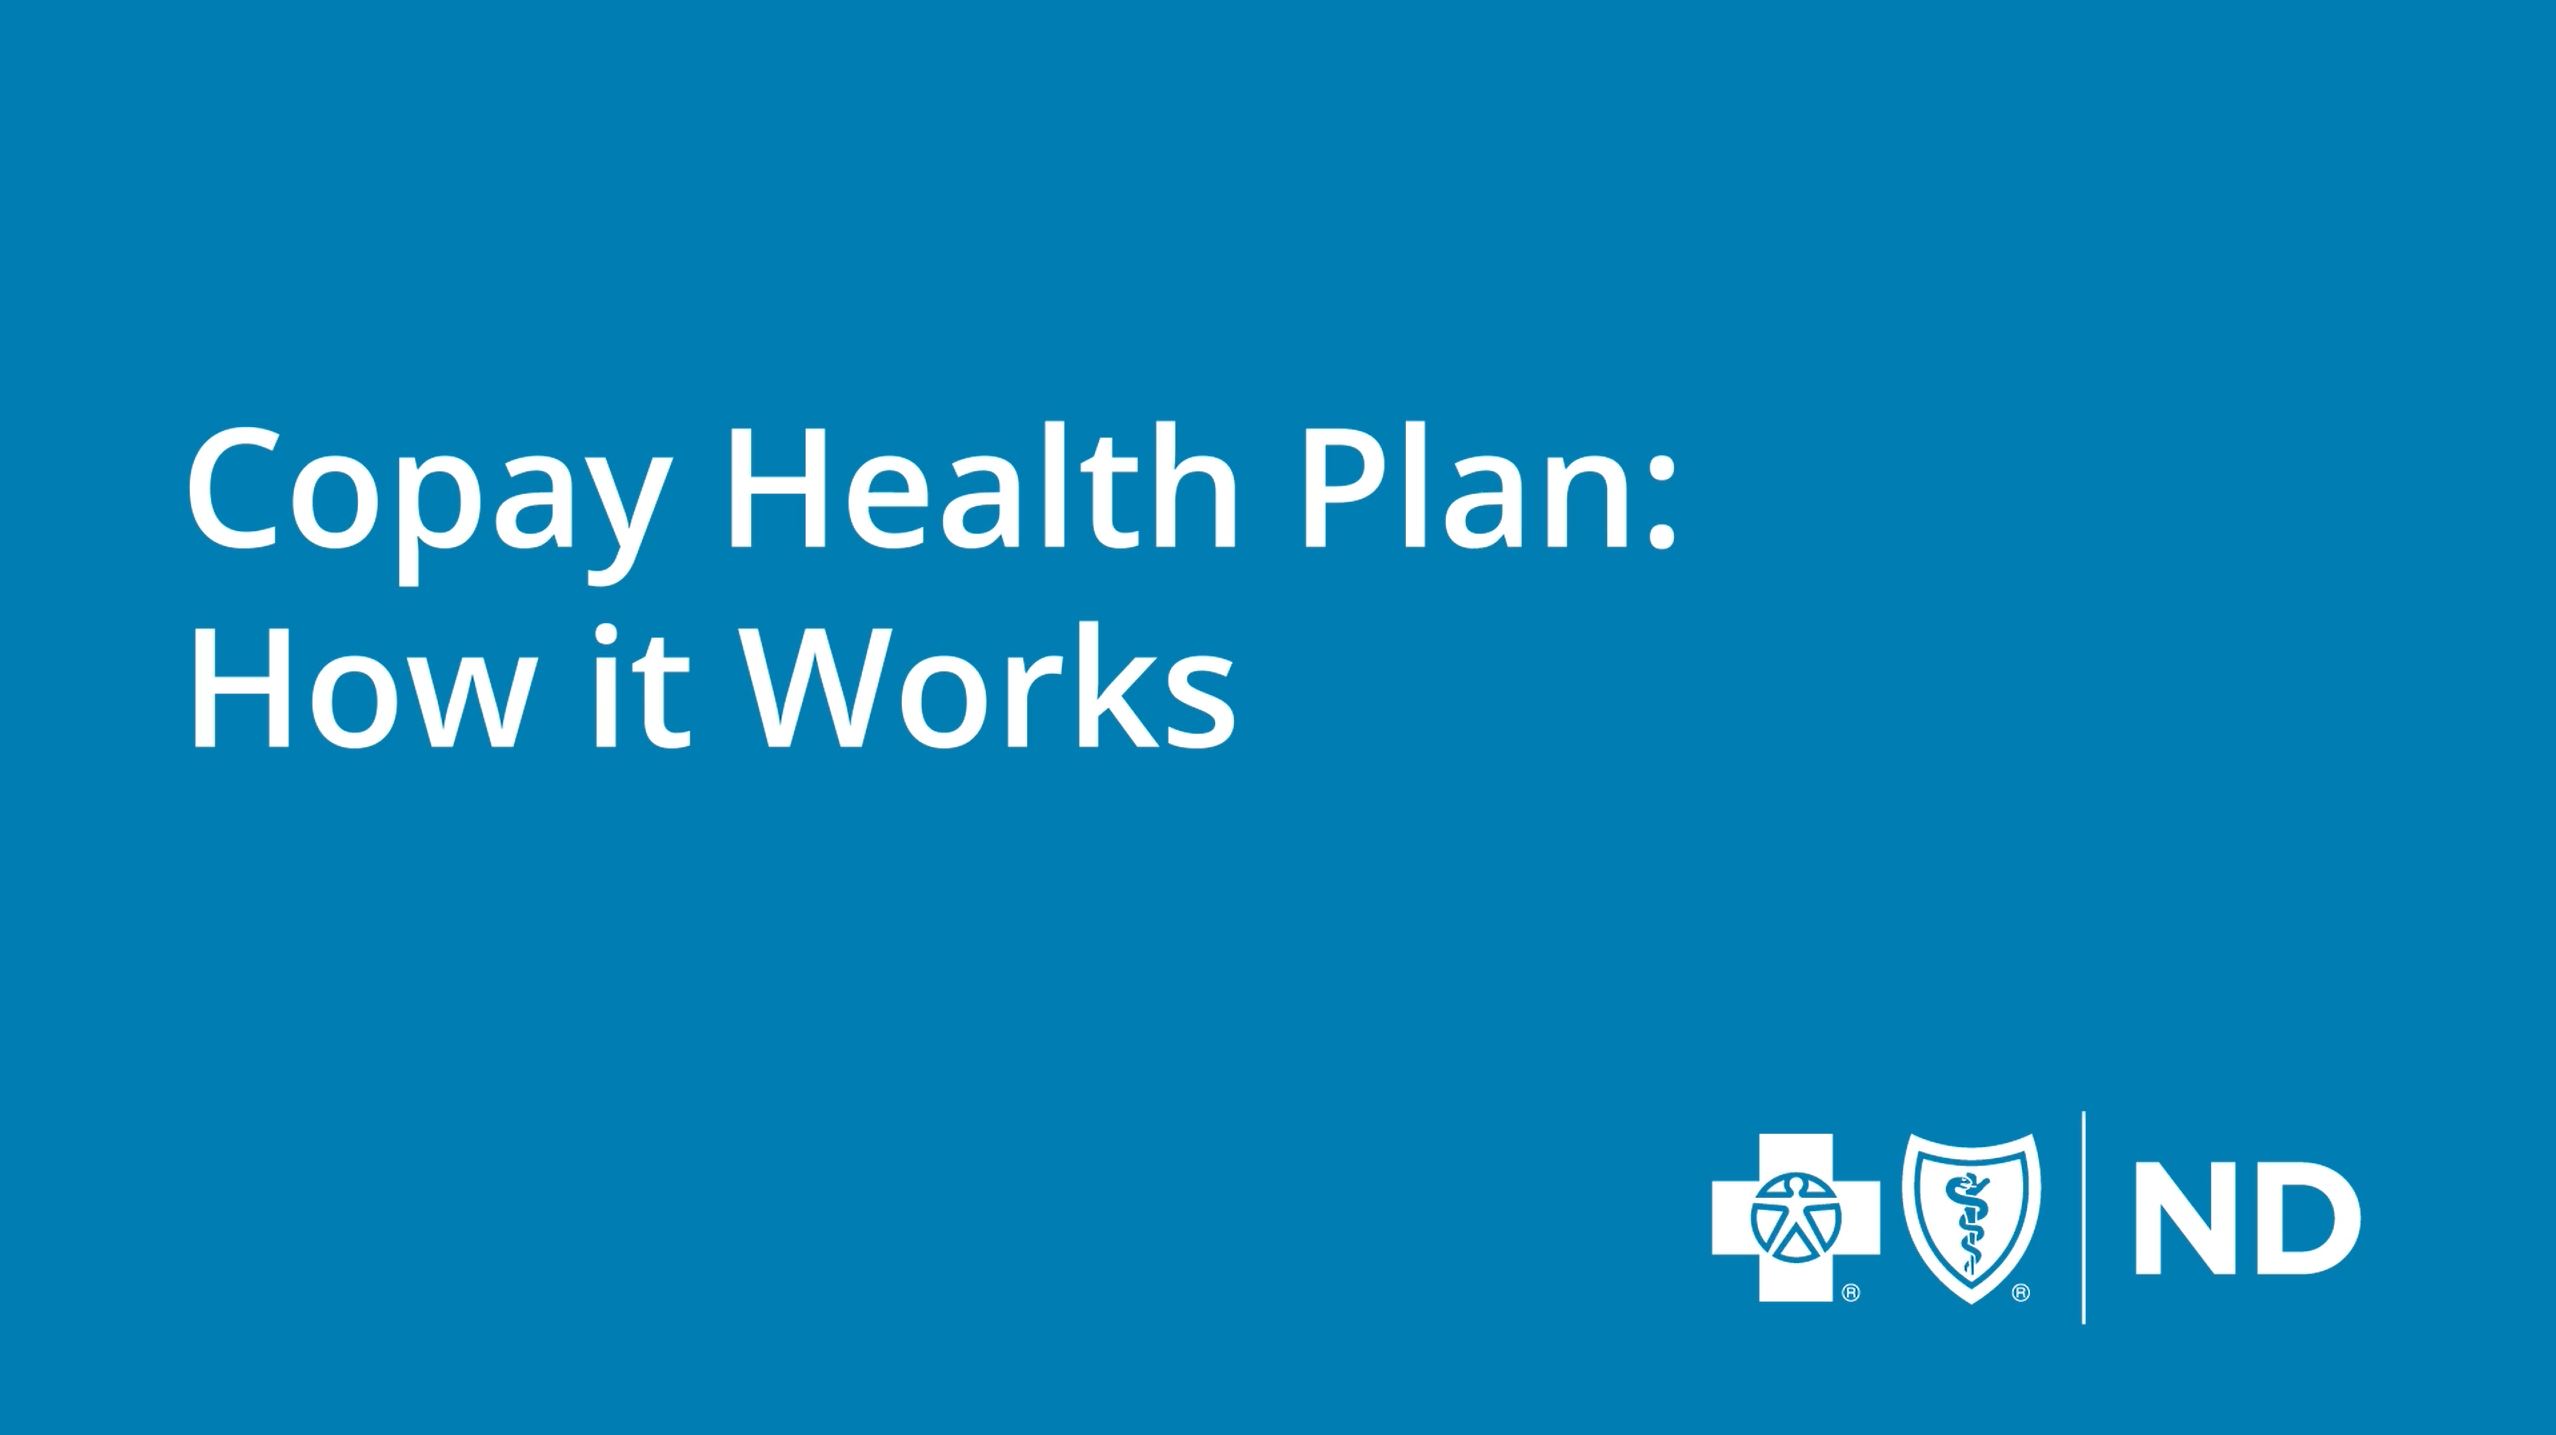 Copay health plan: How it works